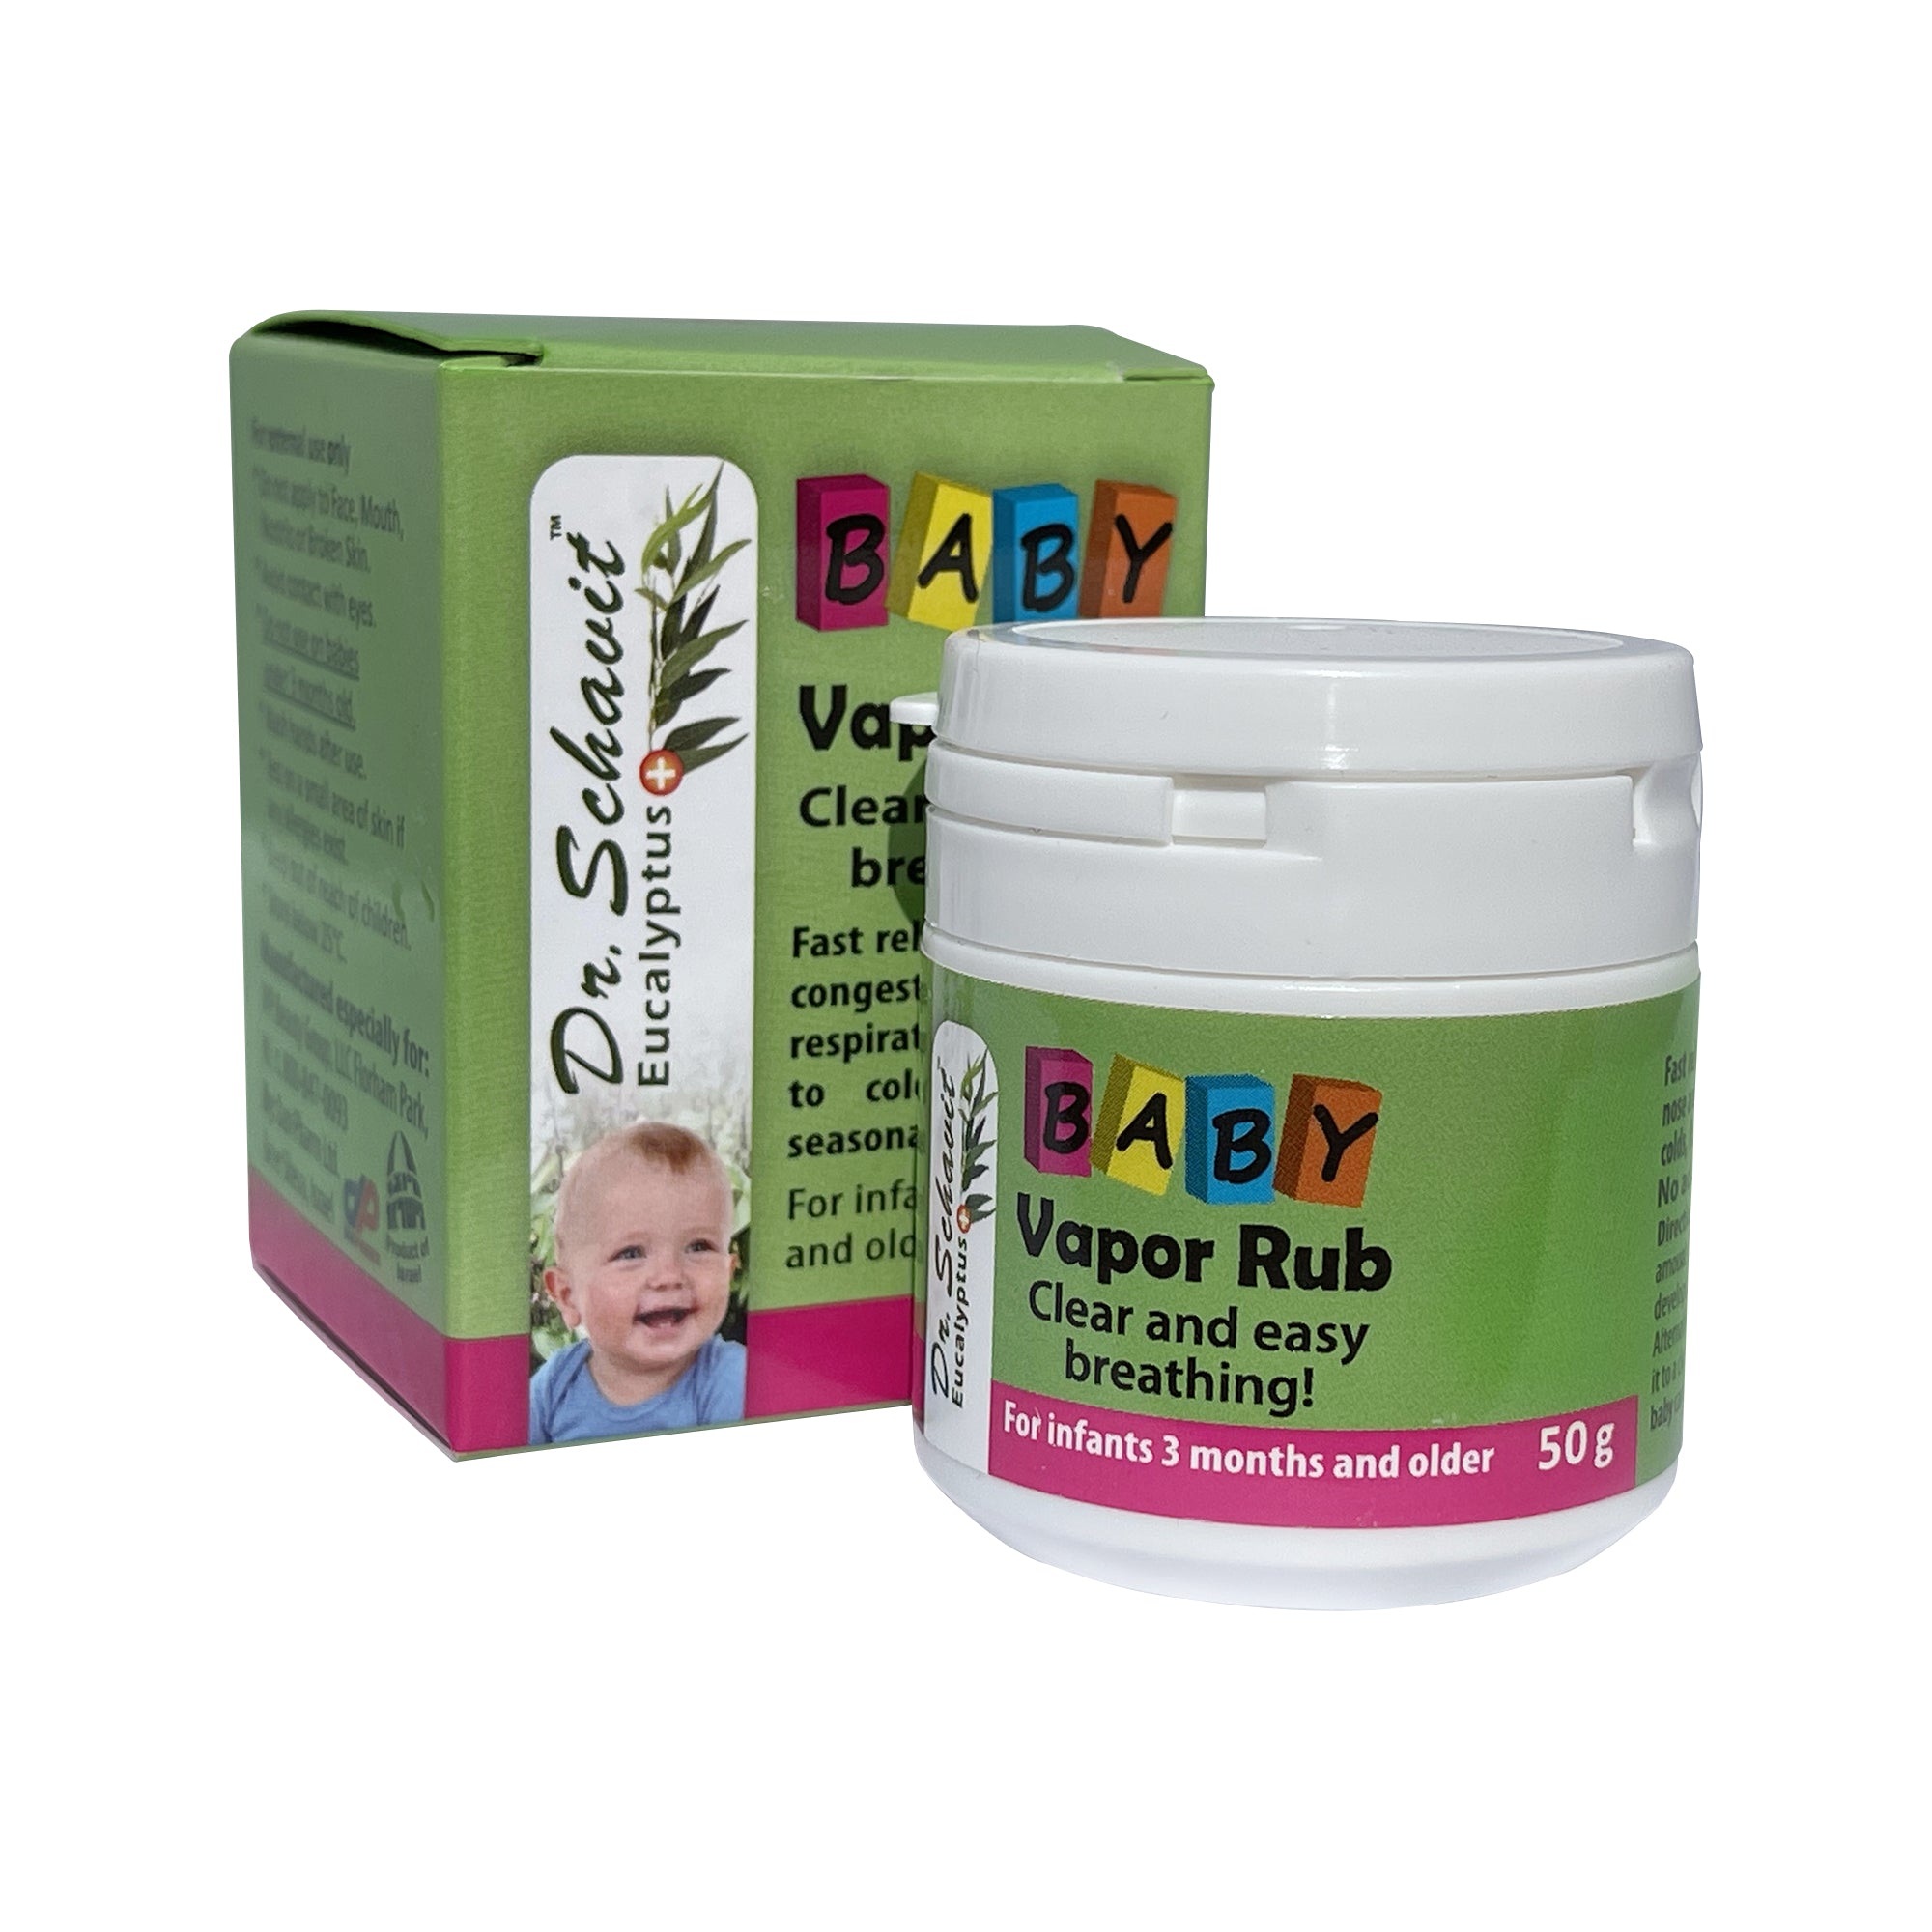 DR. SCHAVIT Baby Soothing Chest Rub. Vapor Rub – Nasal Congestion Balm for Infant, Baby, Toddler